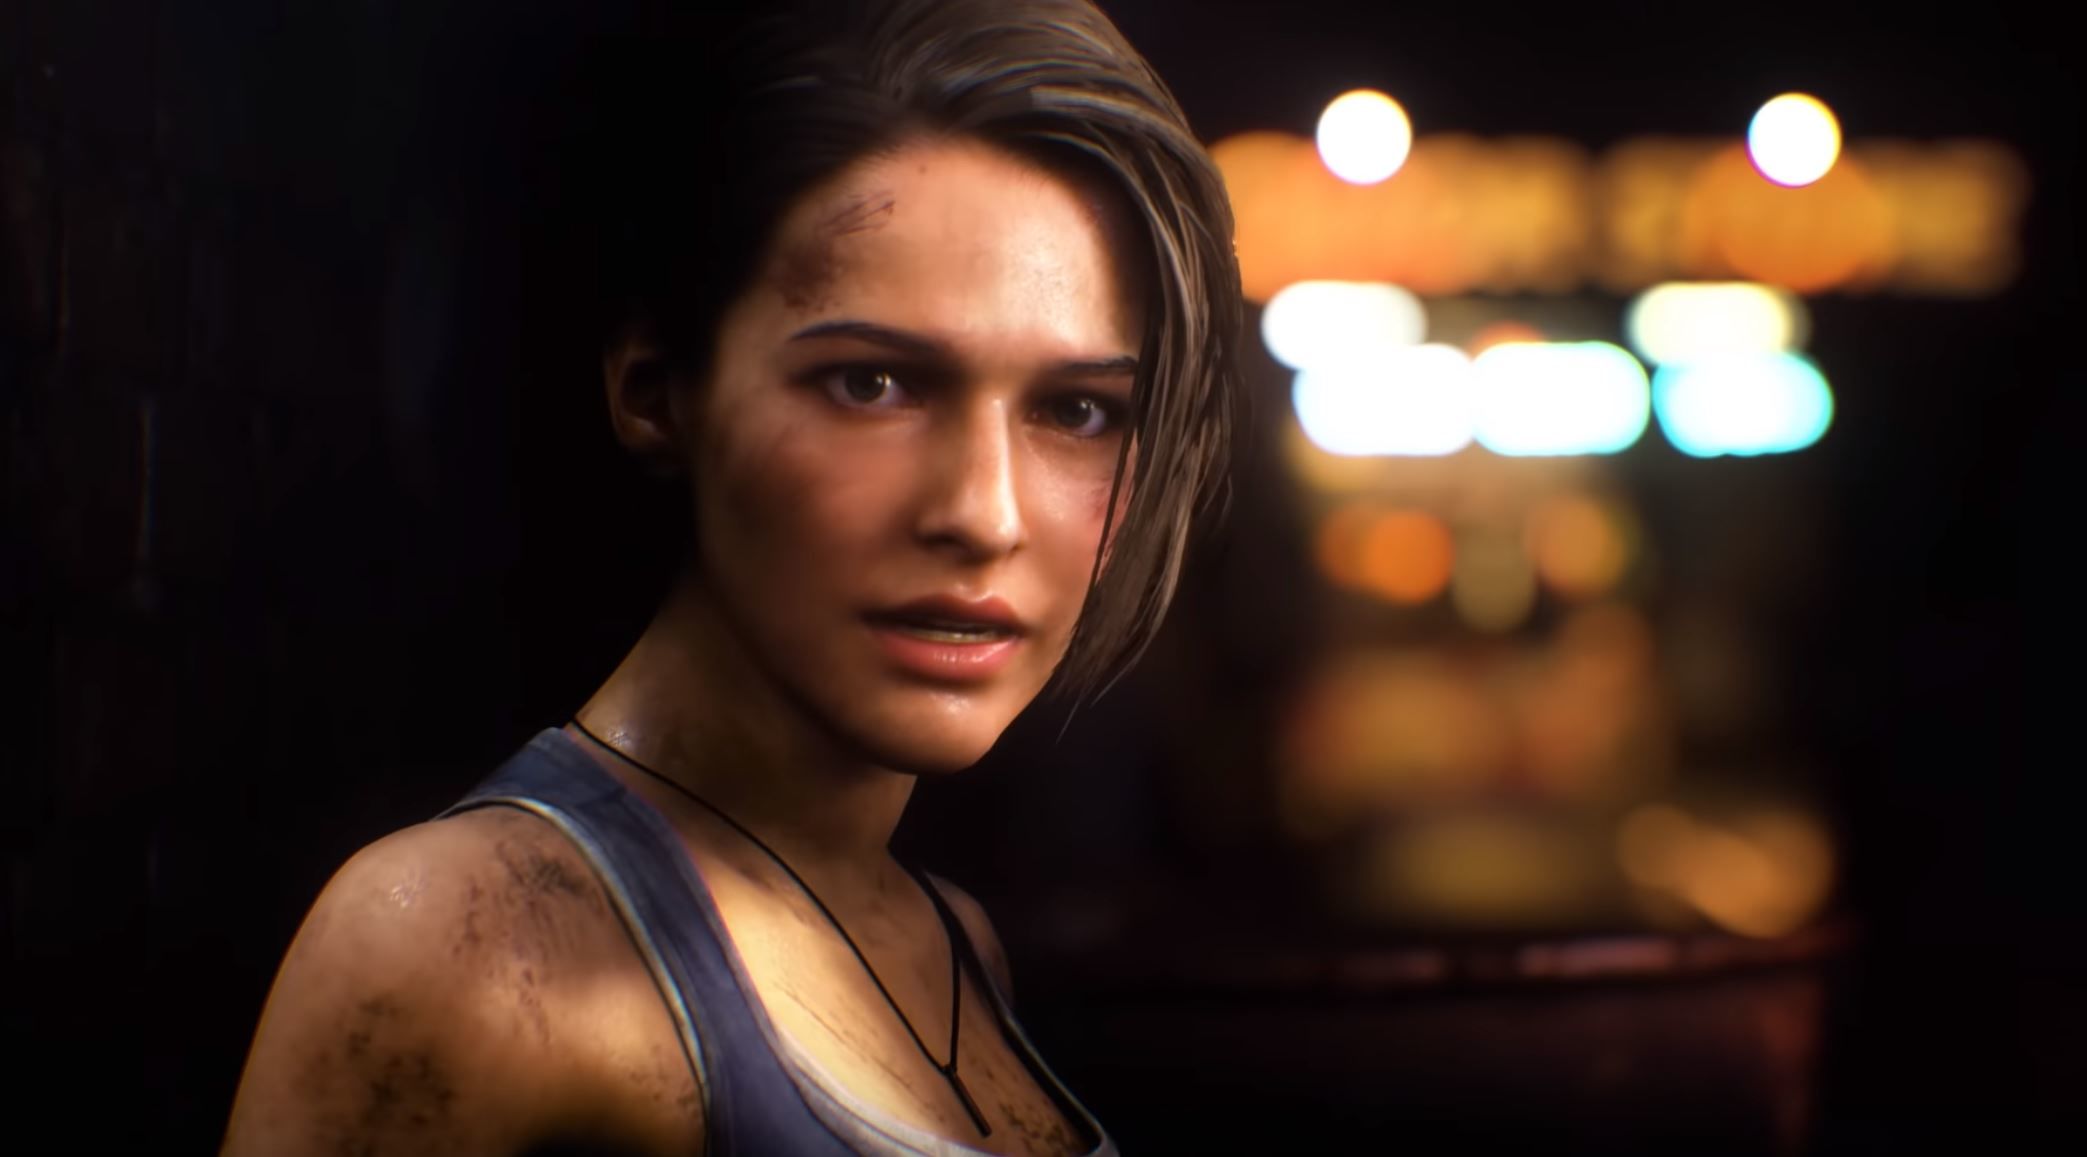 Resident Evil 3: 10 Changes They Made To Jill Only True Fans Noticed